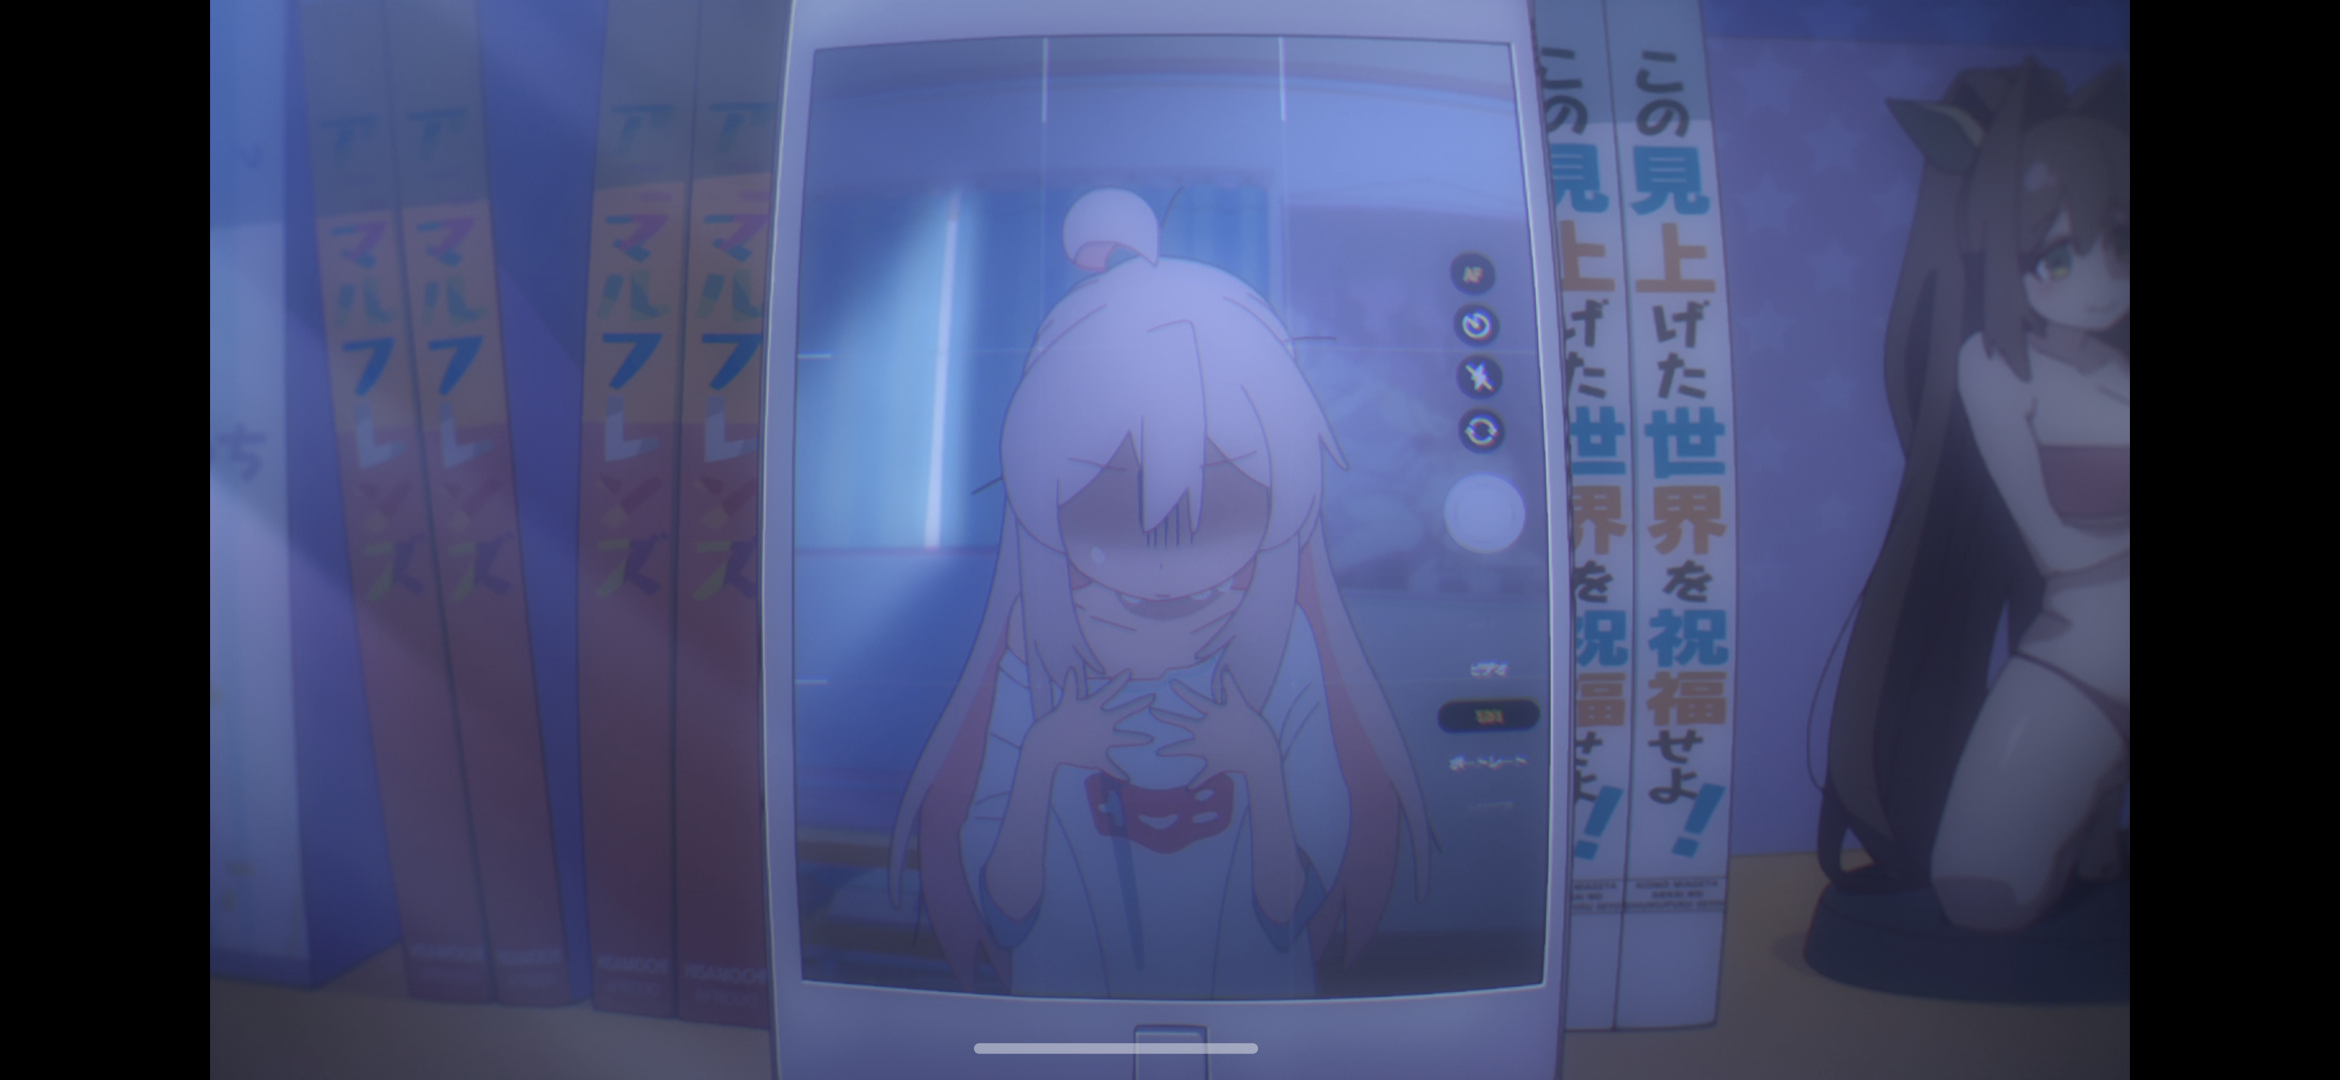 Plastic memories is a sad romance anime recommendation that will leave